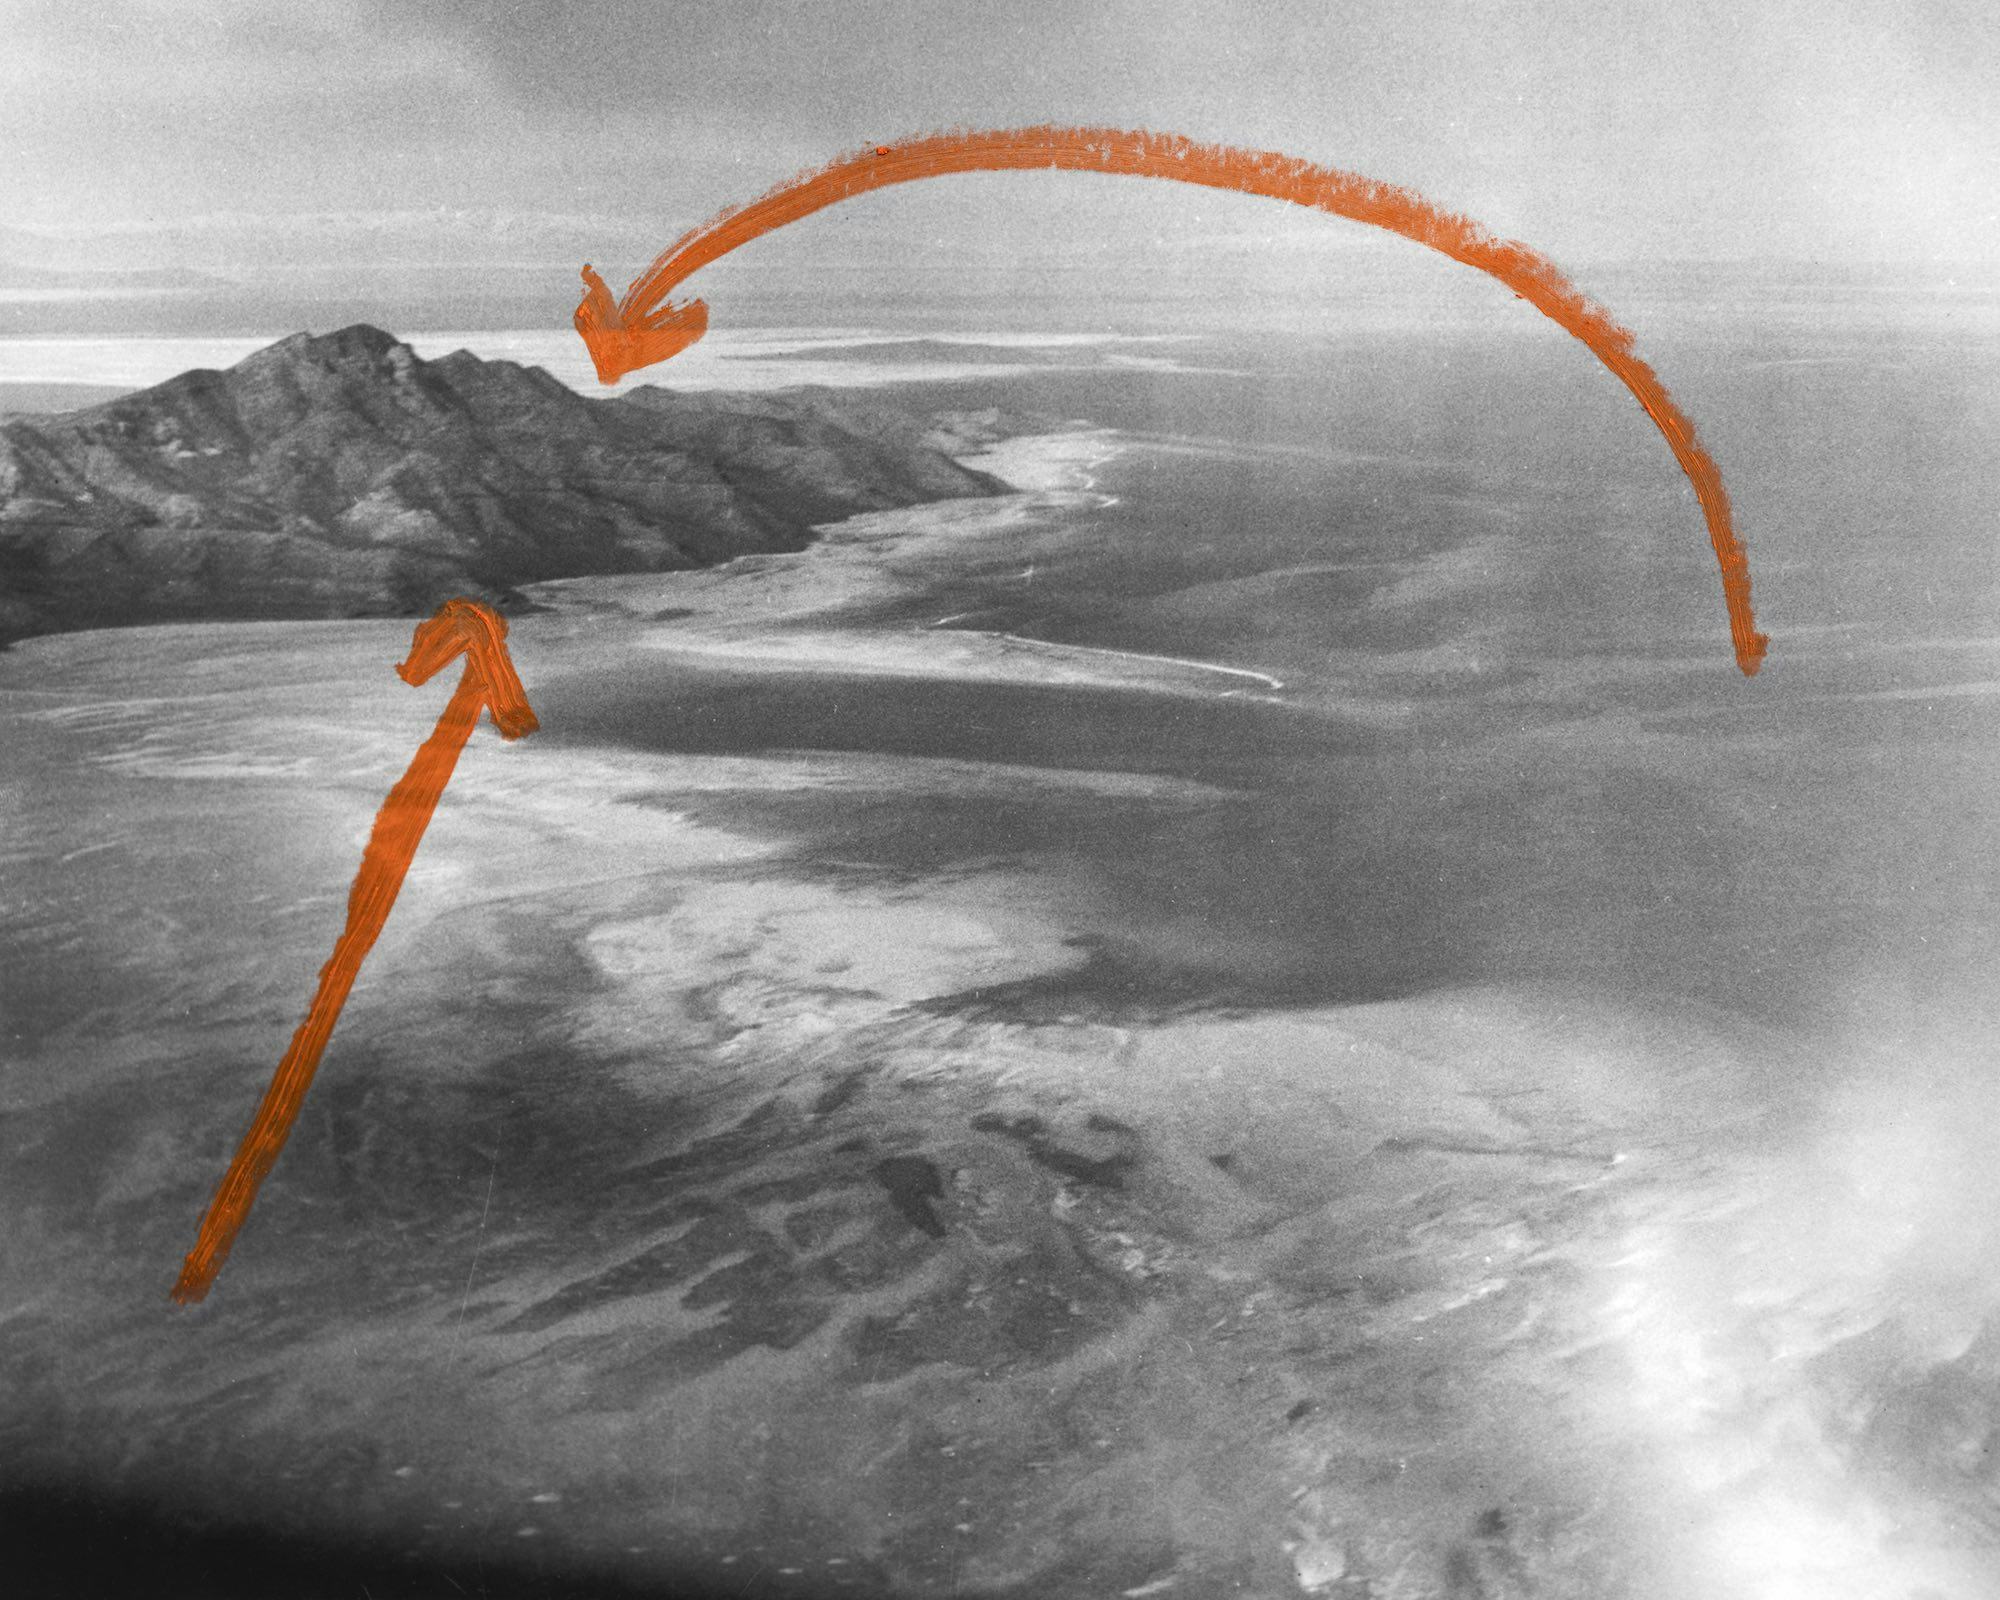 Archival aerial image of Stansbury Island in the Great Salt Lake (Utah), with two arrows in red paint drawn on top. © Jaclyn Wright